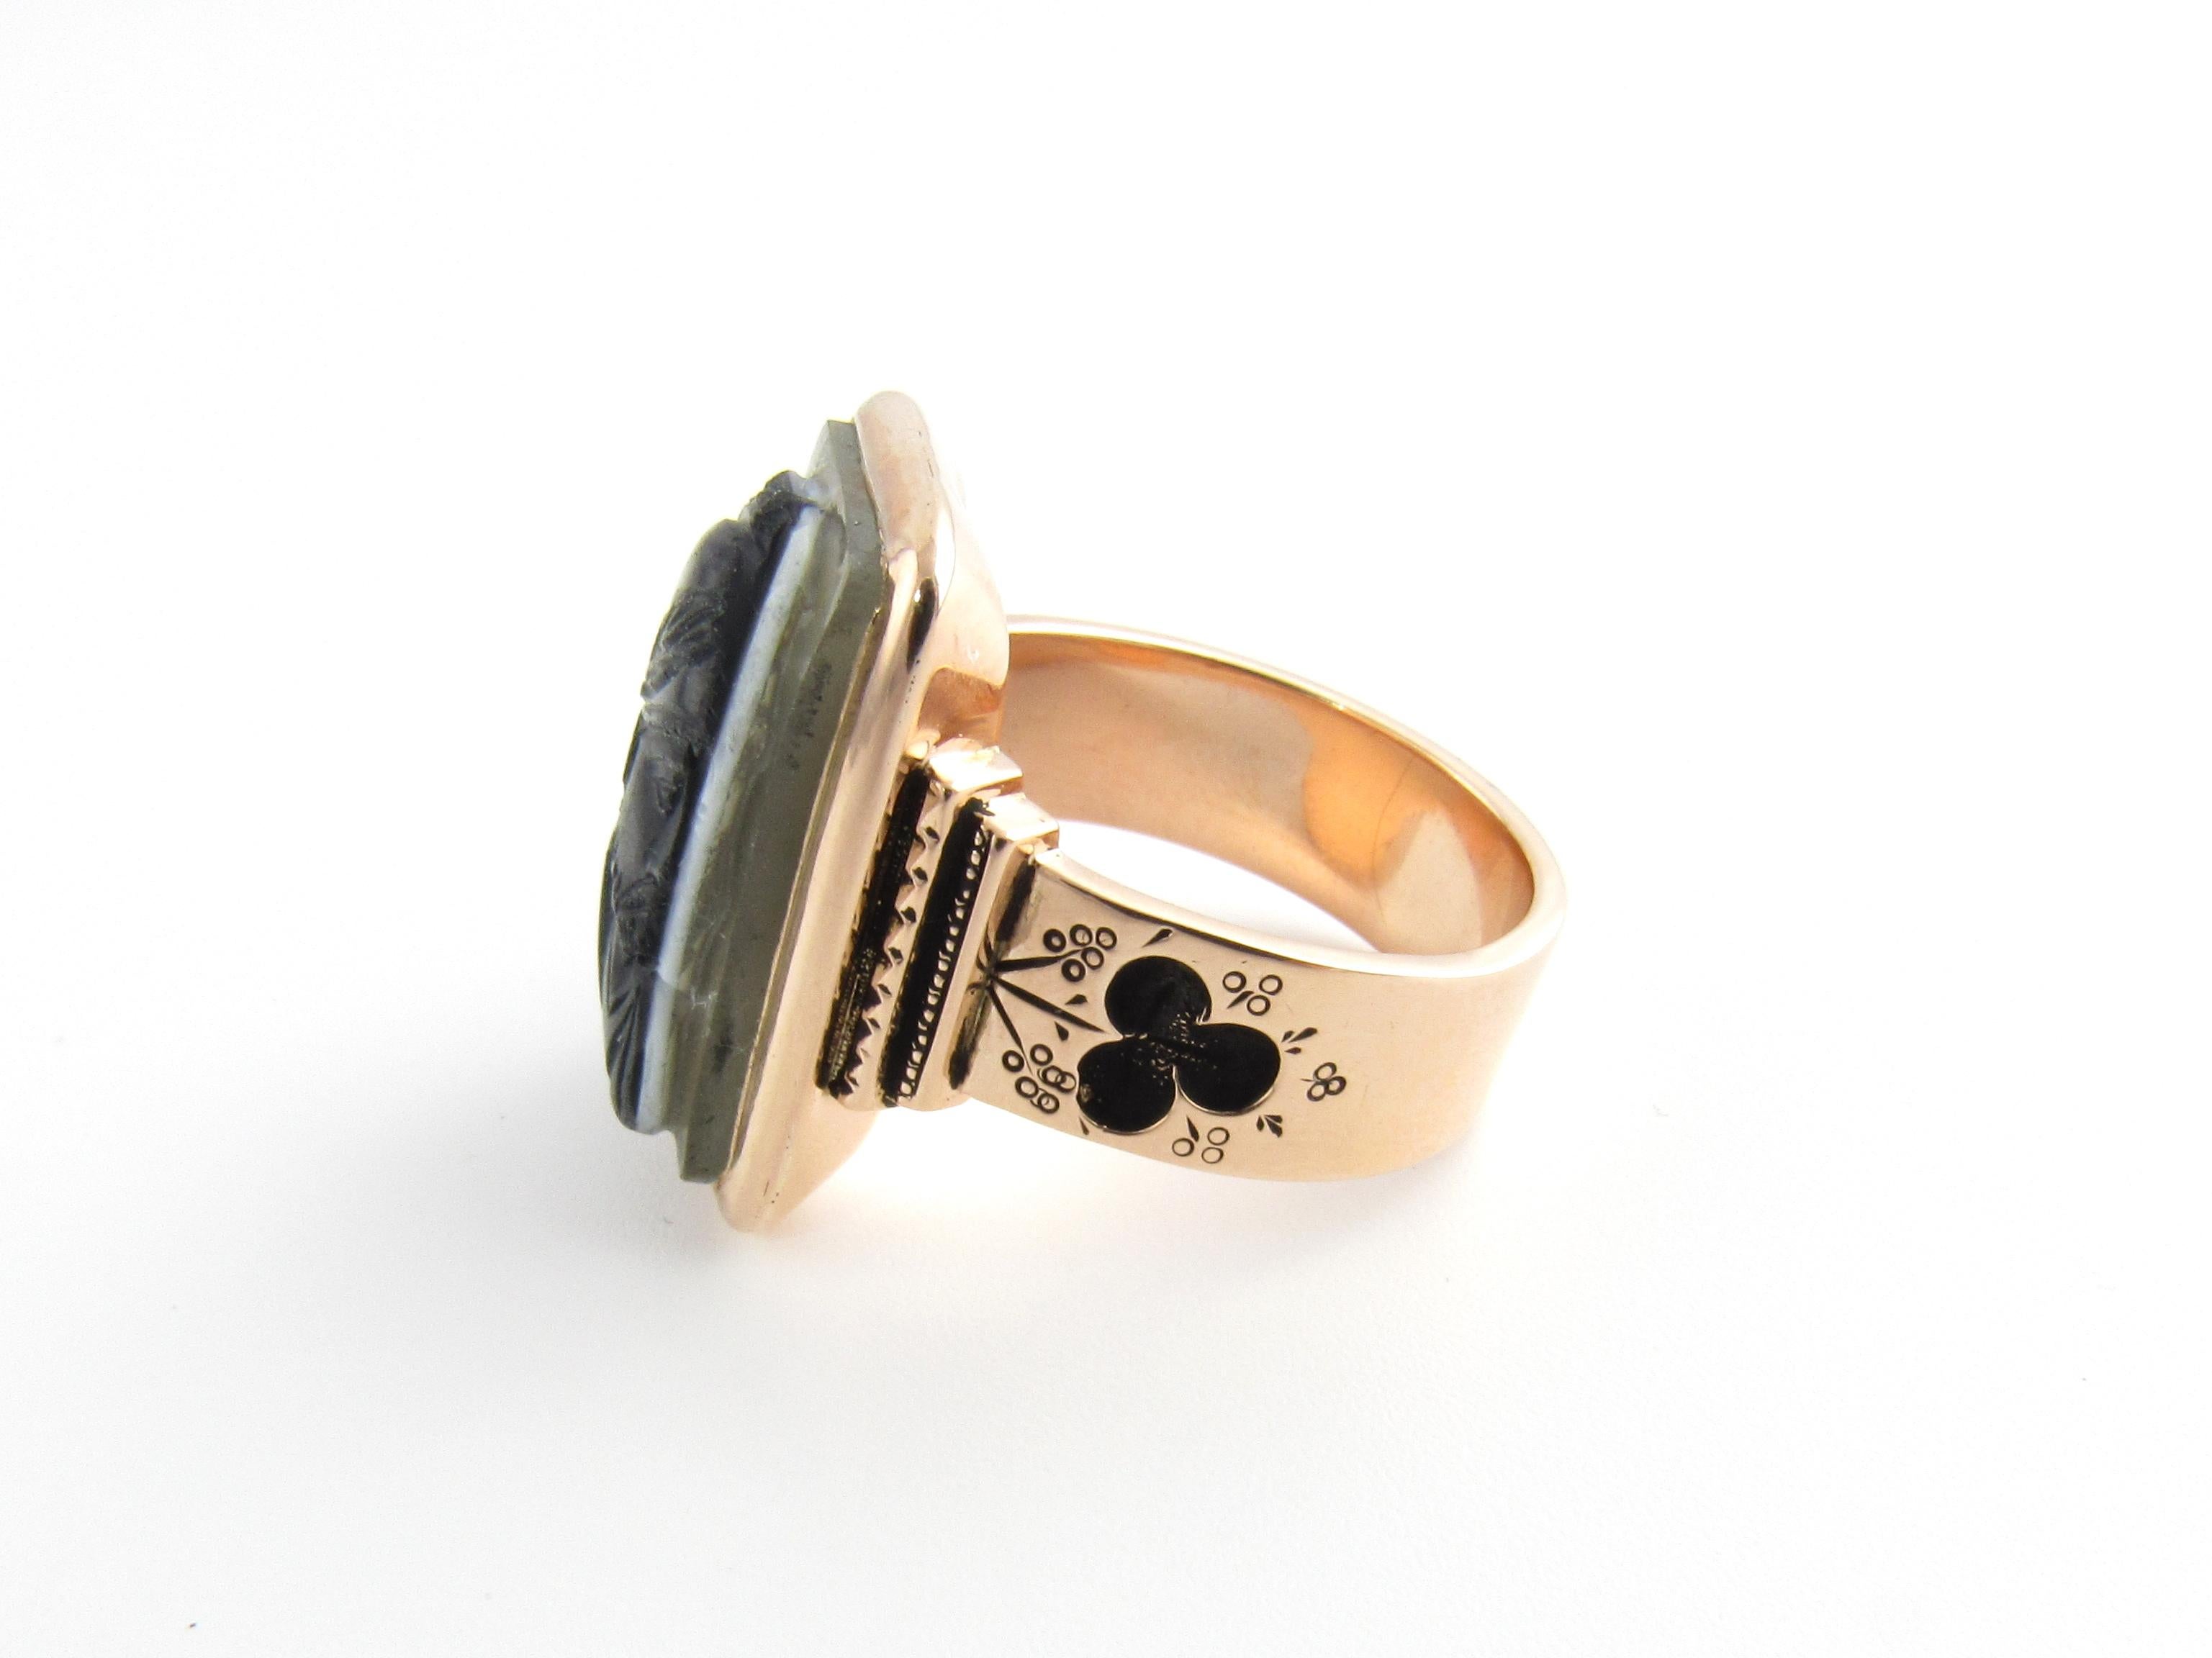 Vintage 10 Karat Yellow Gold and Onyx Cameo Ring Size 8.5

This elegant cameo ring features a noble soldier in profile crafted in black onyx and set in beautifully detailed 10K yellow gold. Top of ring measures 22 mm x 16 mm. Shank measures 7